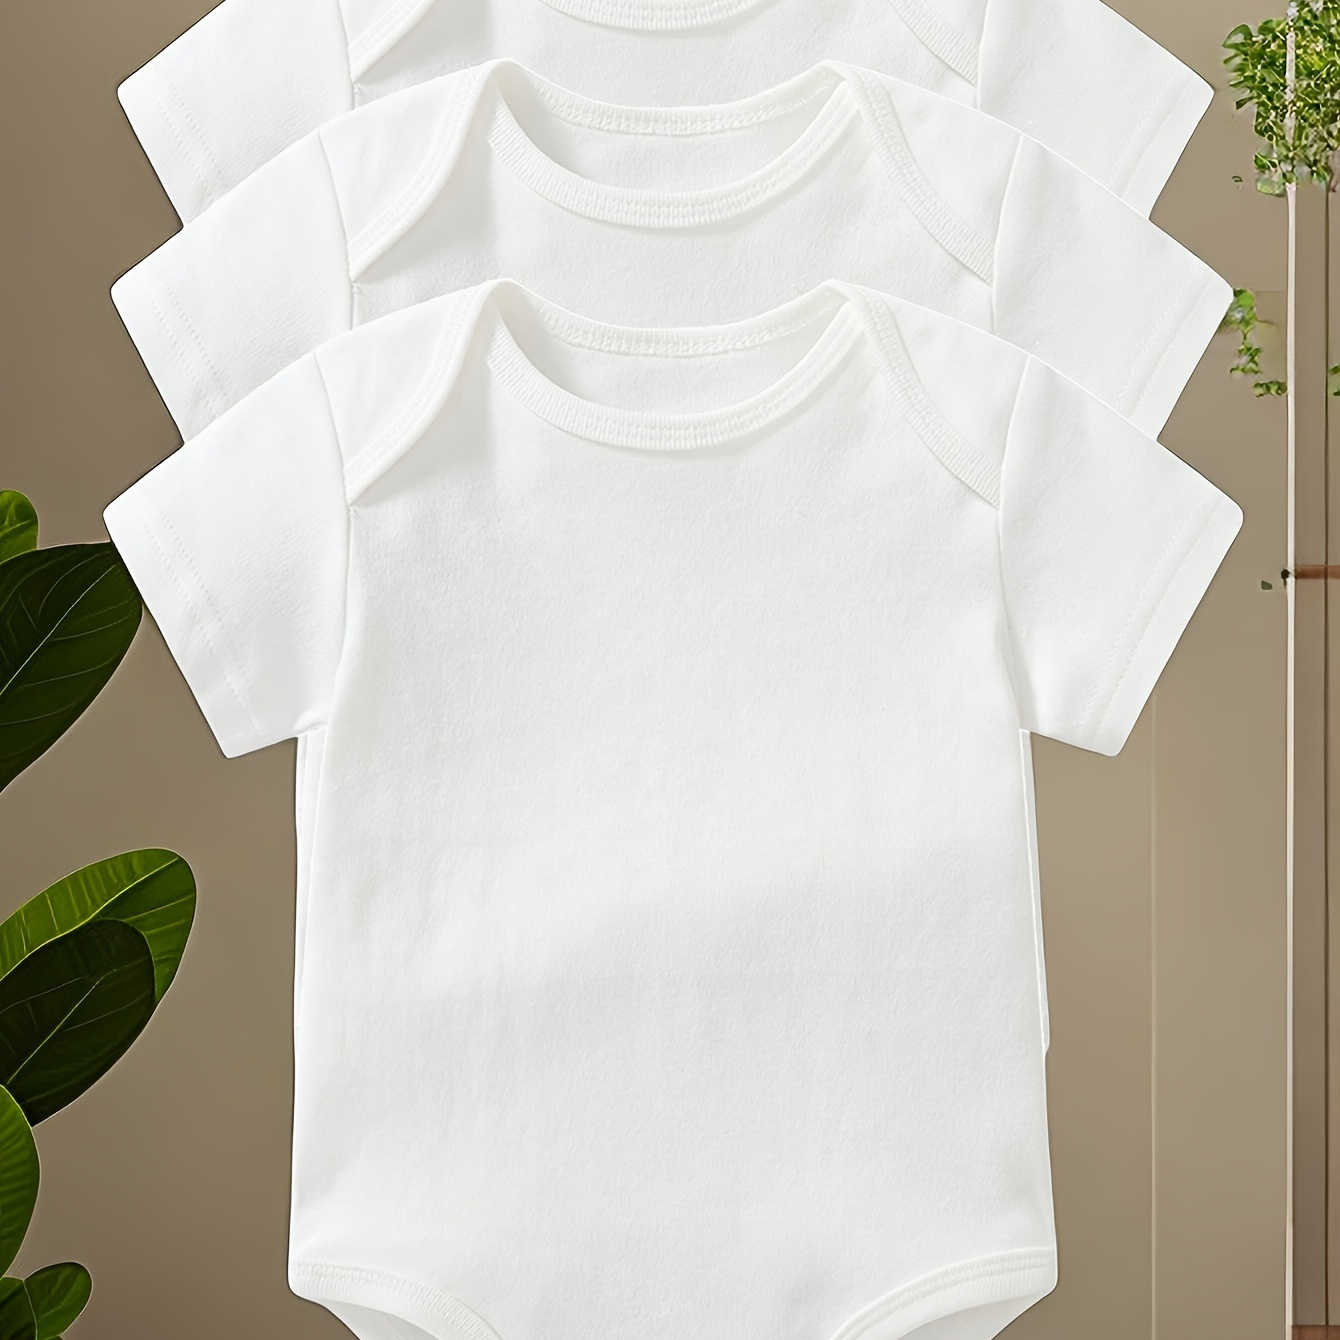 

3pcs Baby Boys Comfy 100% Pure Cotton Bodysuit, Solid Color Short Sleeve Onesie, Baby Boy's Clothing, As Gift